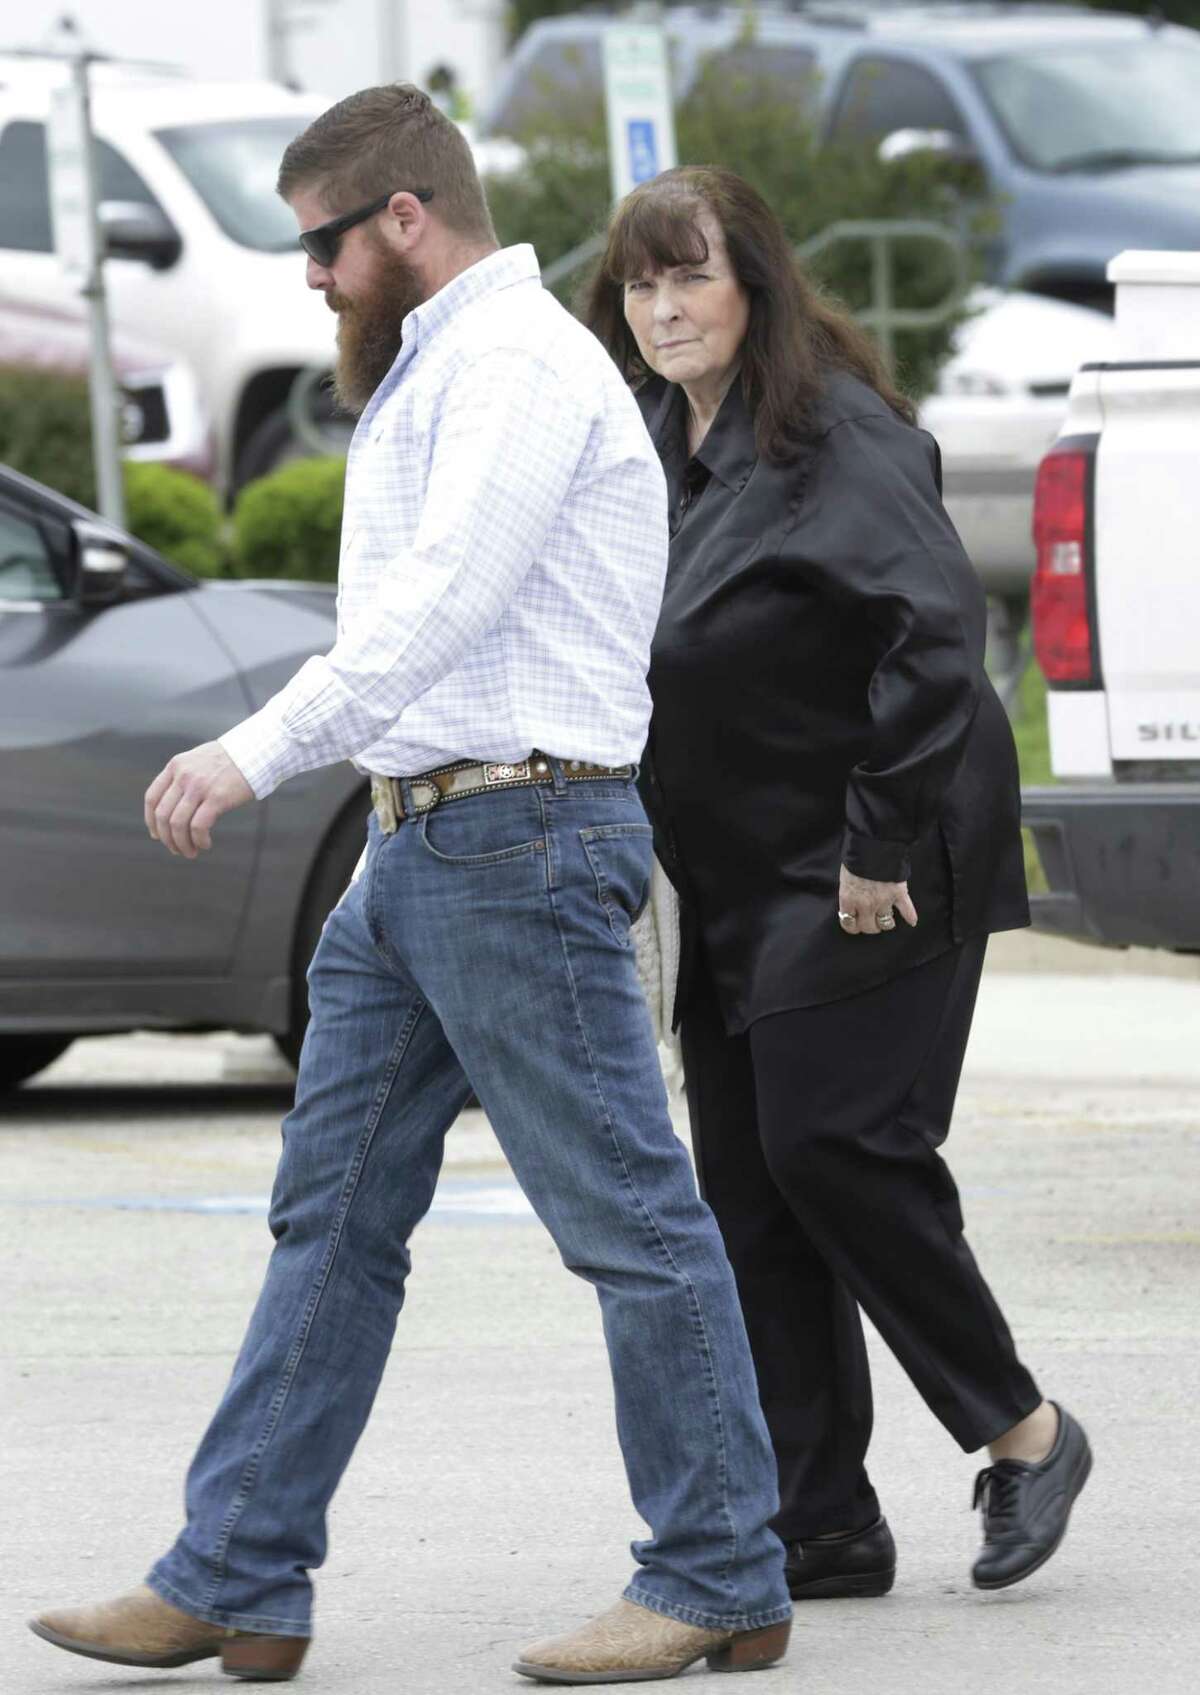 Yvonne Whitney, right, mother of SAPD Officer Robert Deckard who was killed by Shaun Puente, walks with a relative near the Atascosa Courthouse in Jourdanton, where the jury in the trial of Puente, was stuck and the judge decided on life in prison without parole, held on Friday, April 6, 2018.